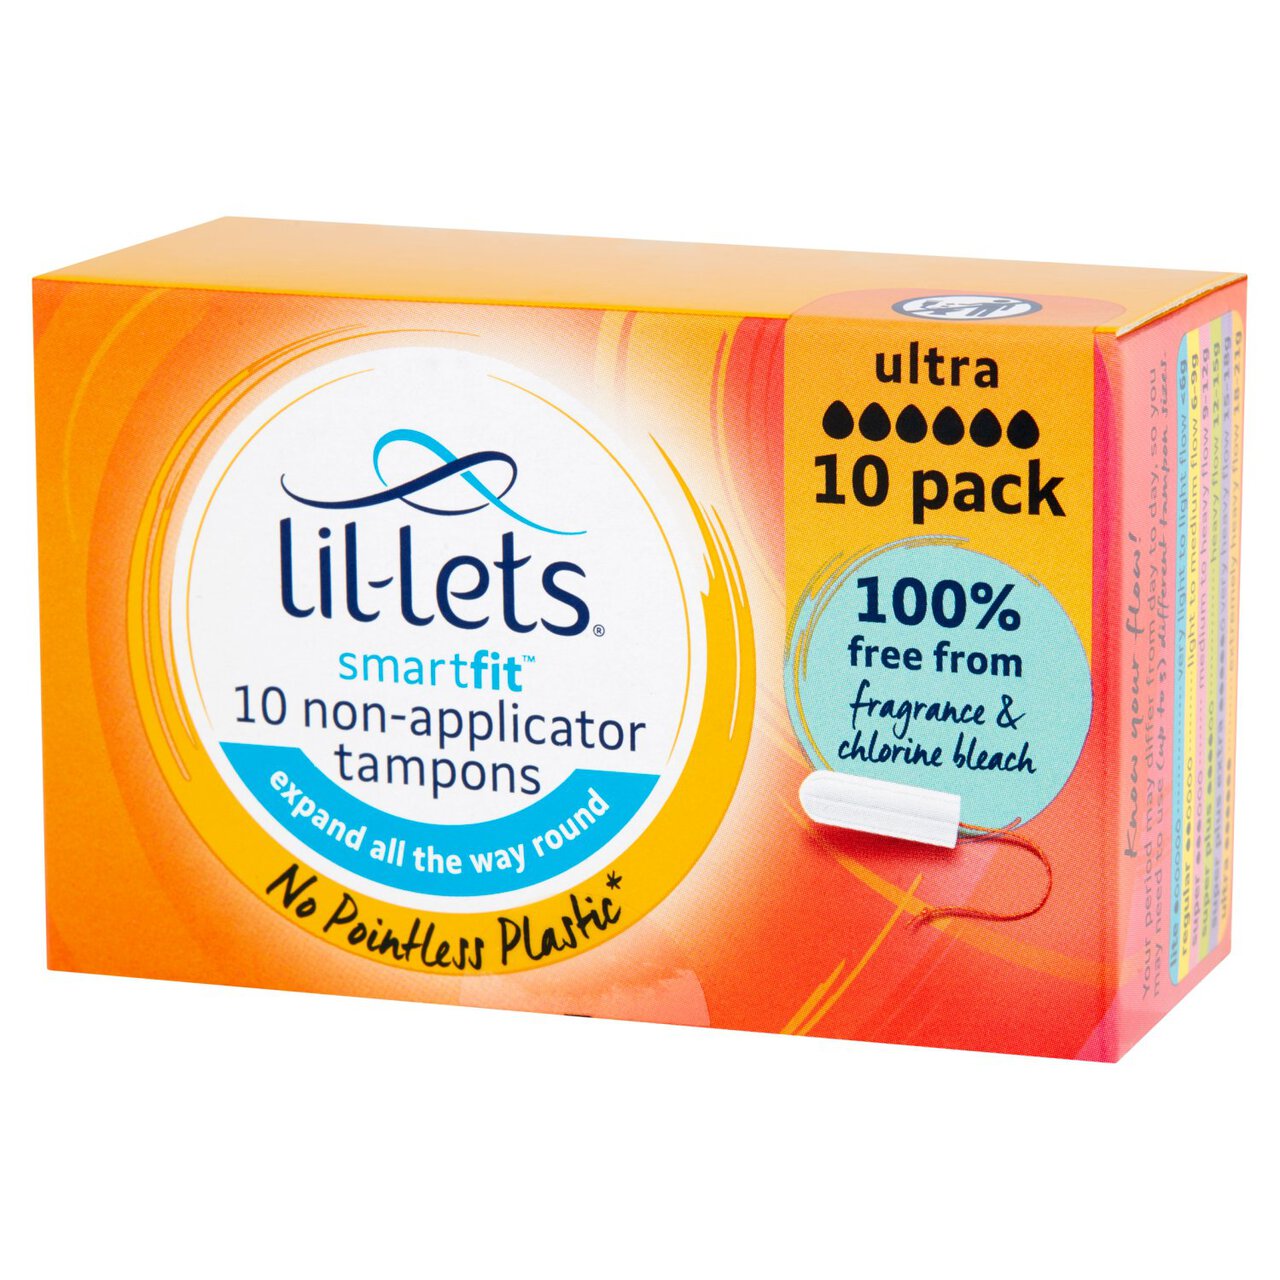 Lil-Lets Smartfit Non-Applicator Tampons Ultra 10 per pack